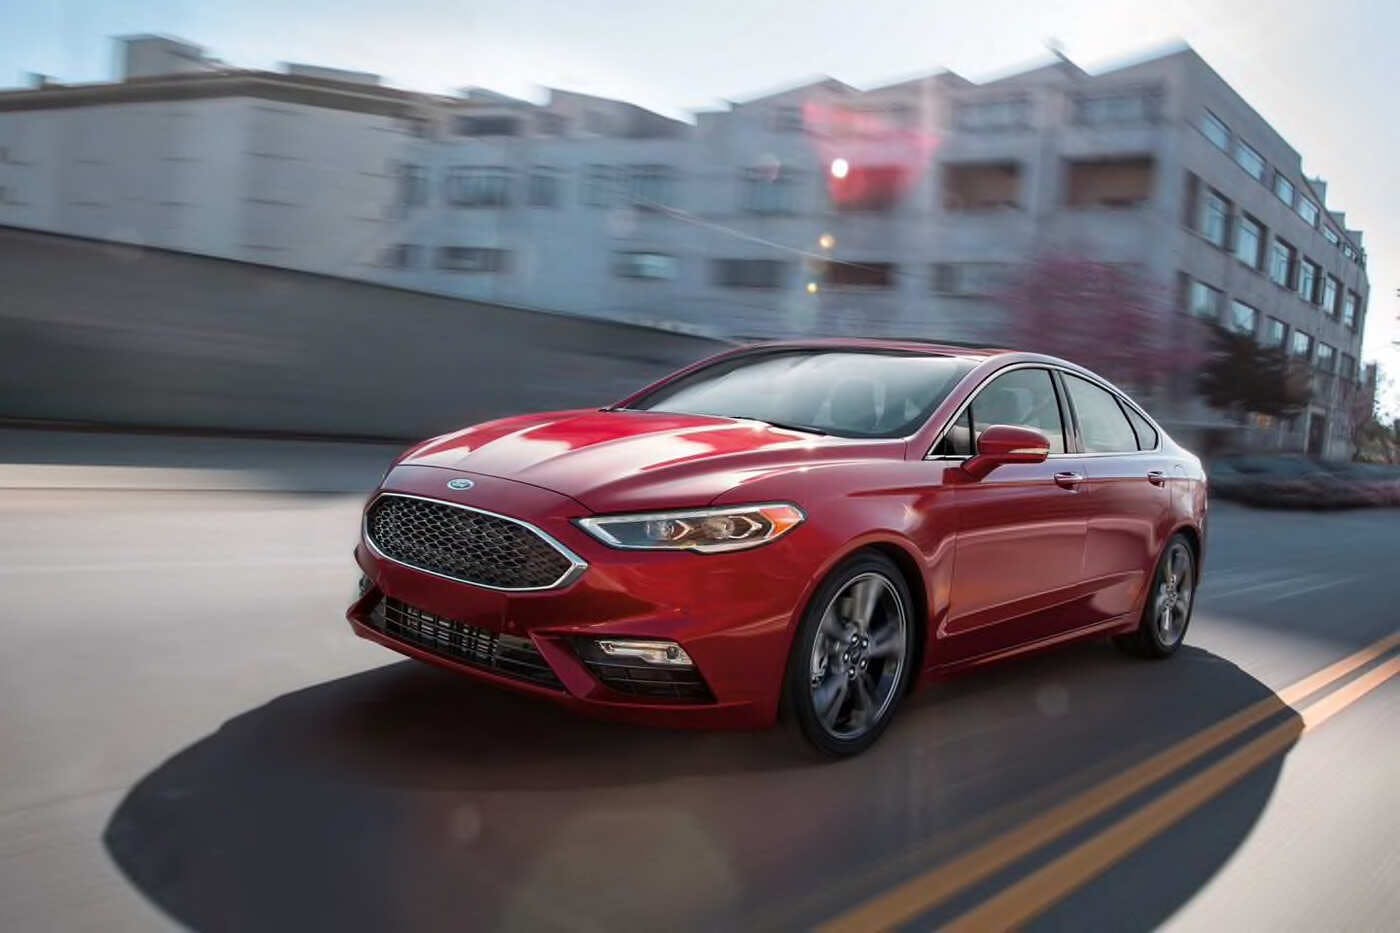 2019 Ford Fusion Prices, Reviews, and Photos - MotorTrend